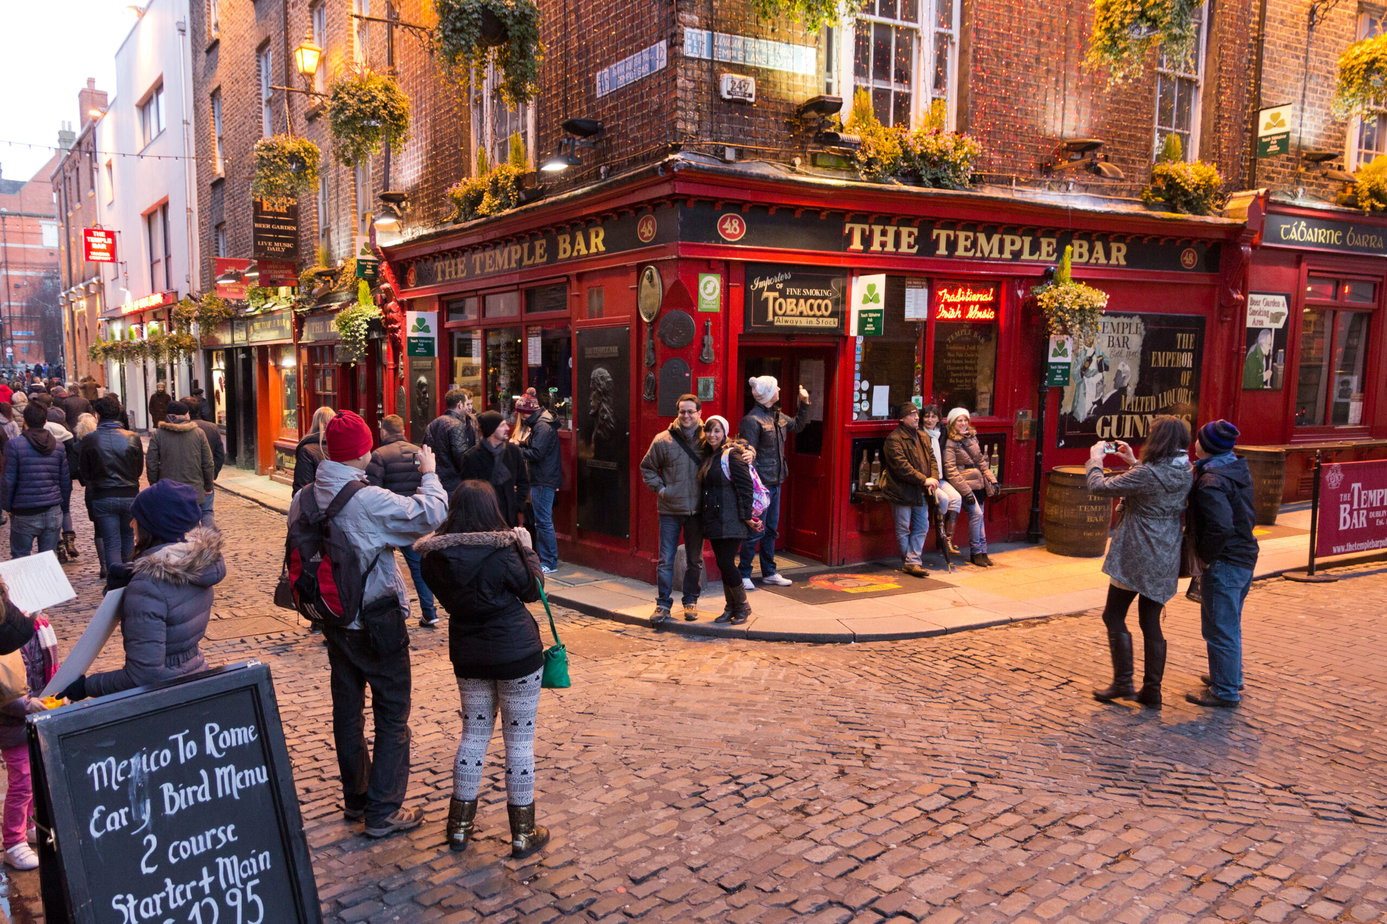 By far the most famous of all of the Irish pubs the Temple Bar, Dublin